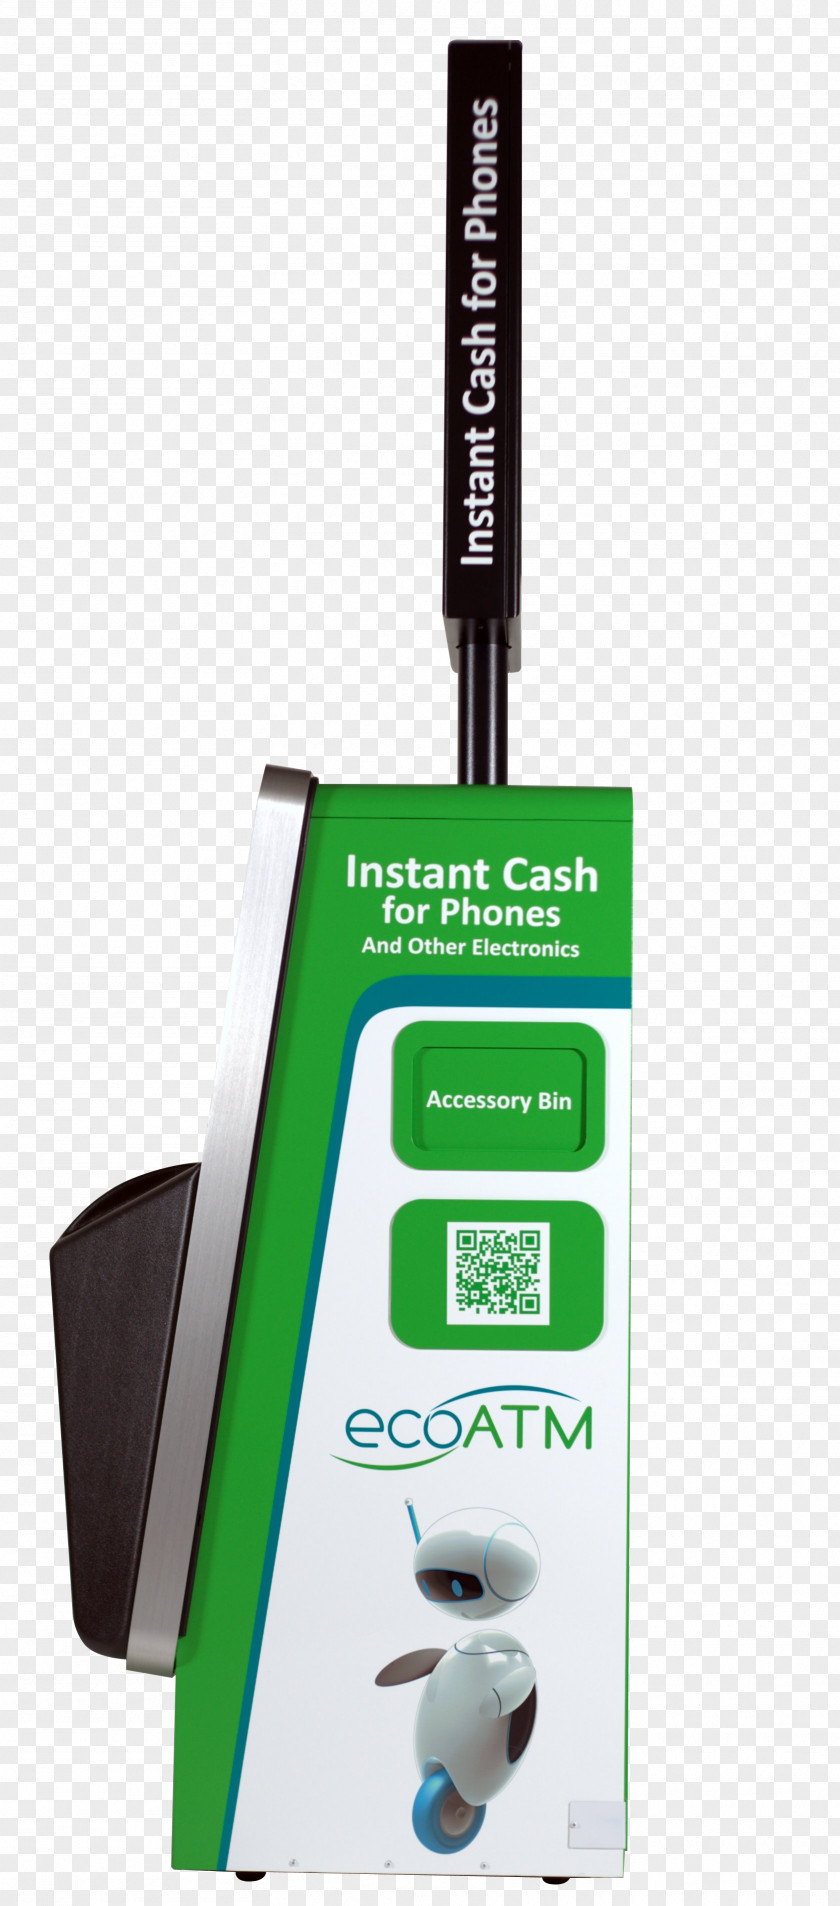 Atm Machine Mobile Phone Recycling Phones EcoATM Electronic Waste PNG